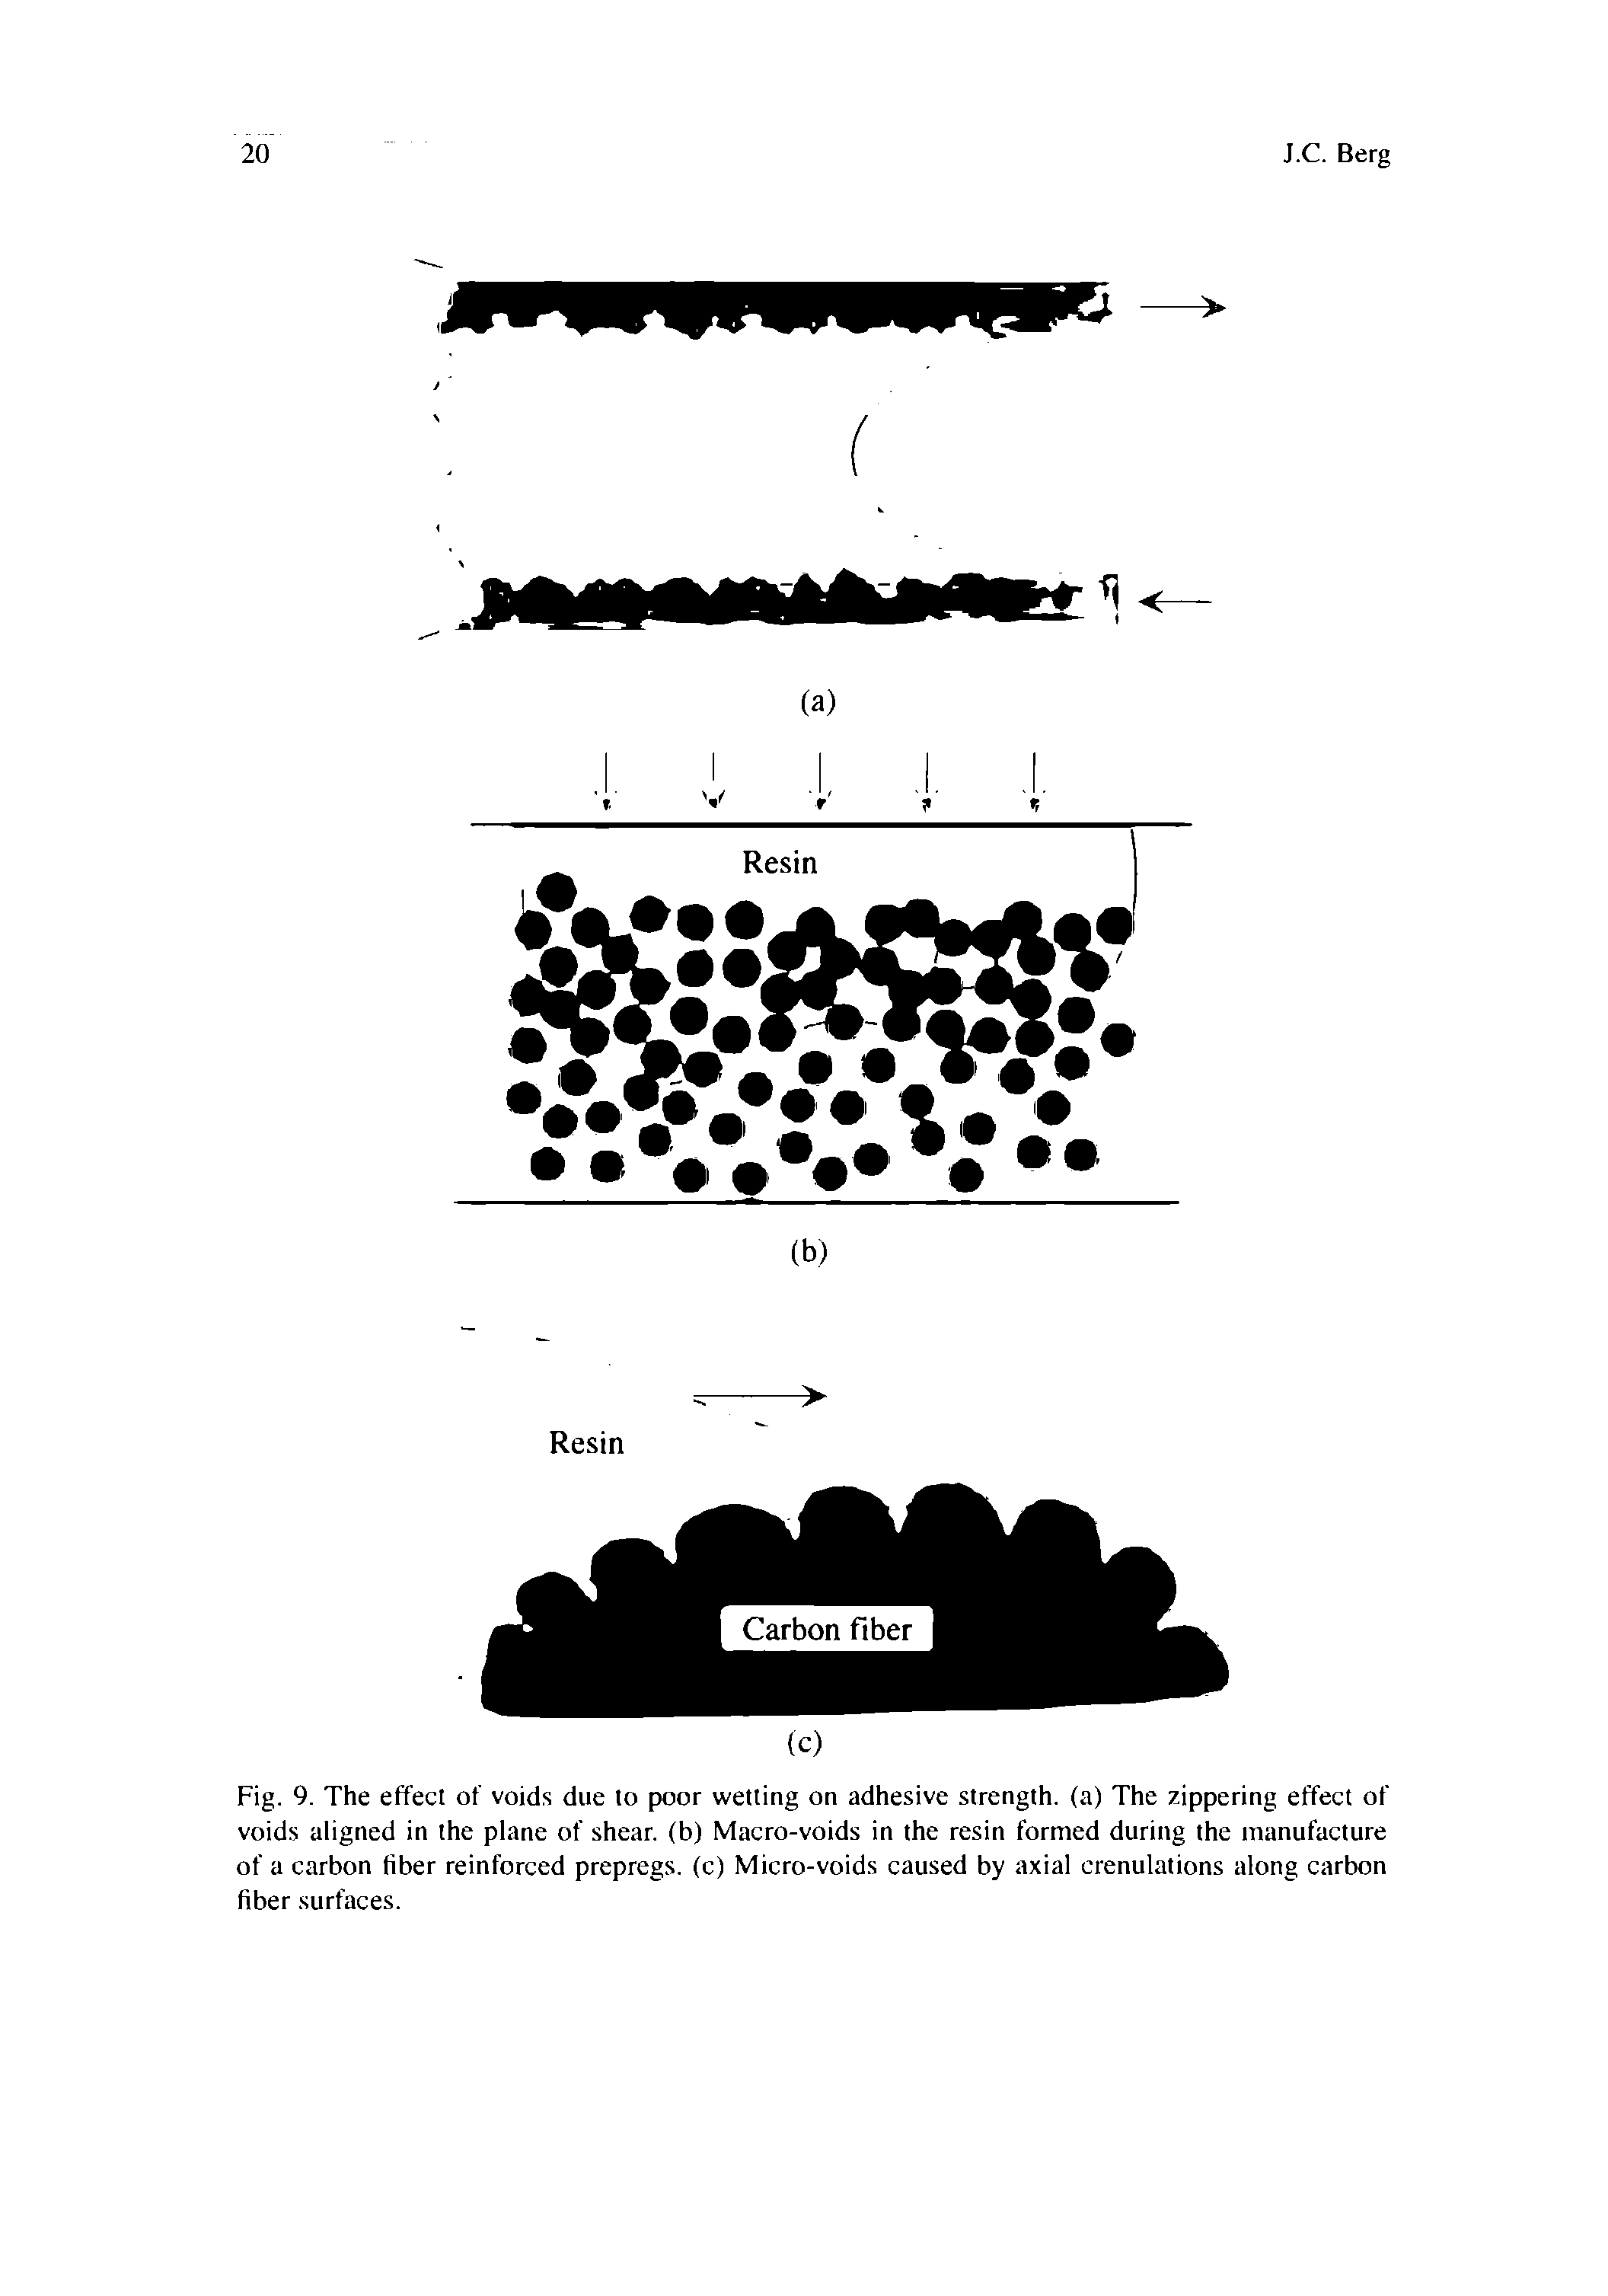 Fig. 9. The effect of voids due to poor wetting on adhesive strength, (a) The zippering effect of voids aligned in the plane of shear, (b) Macro-voids in the resin formed during the manufacture of a carbon fiber reinforced prepregs. (c) Micro-voids caused by axial crenulations along carbon fiber surfaces.